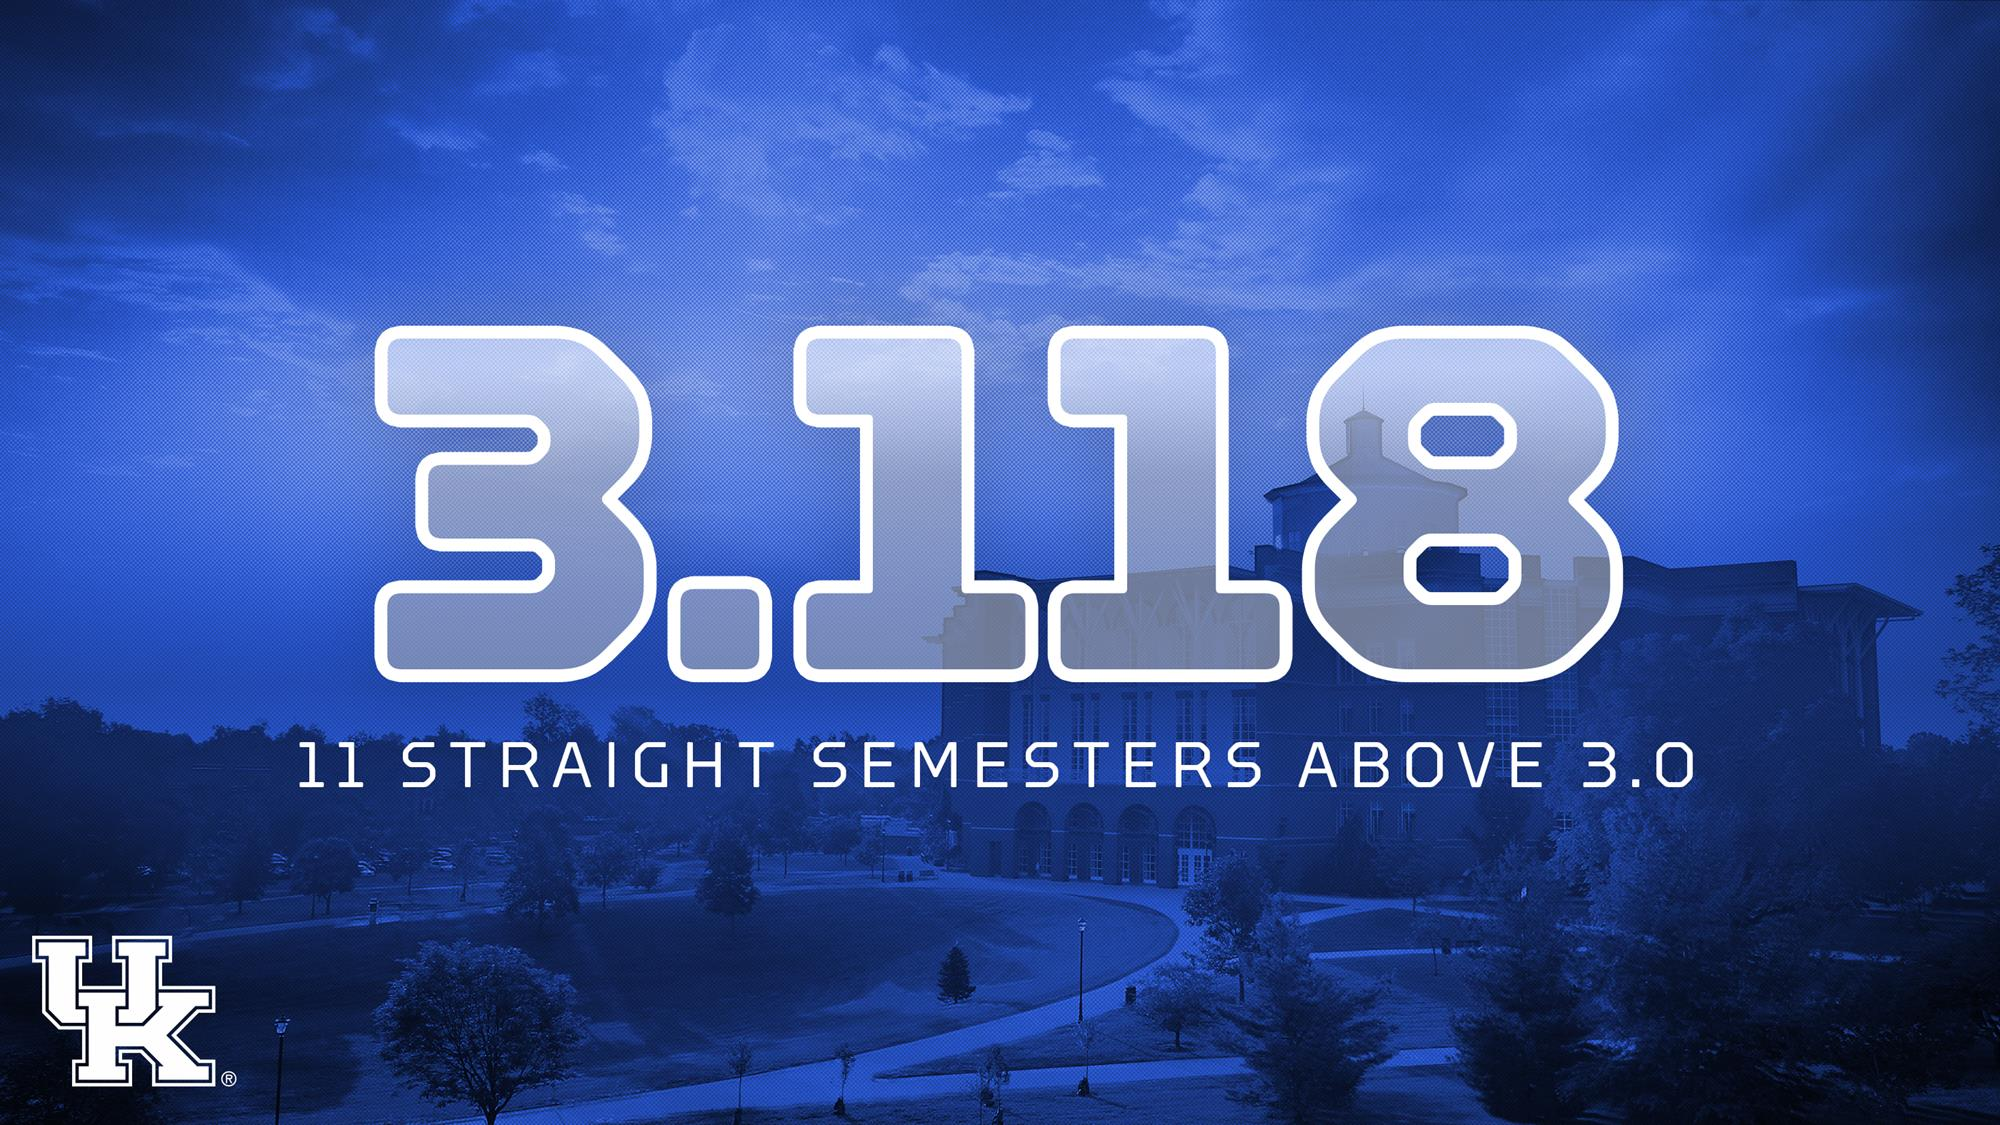 UK Tops 3.0 GPA for 11th Straight Semester